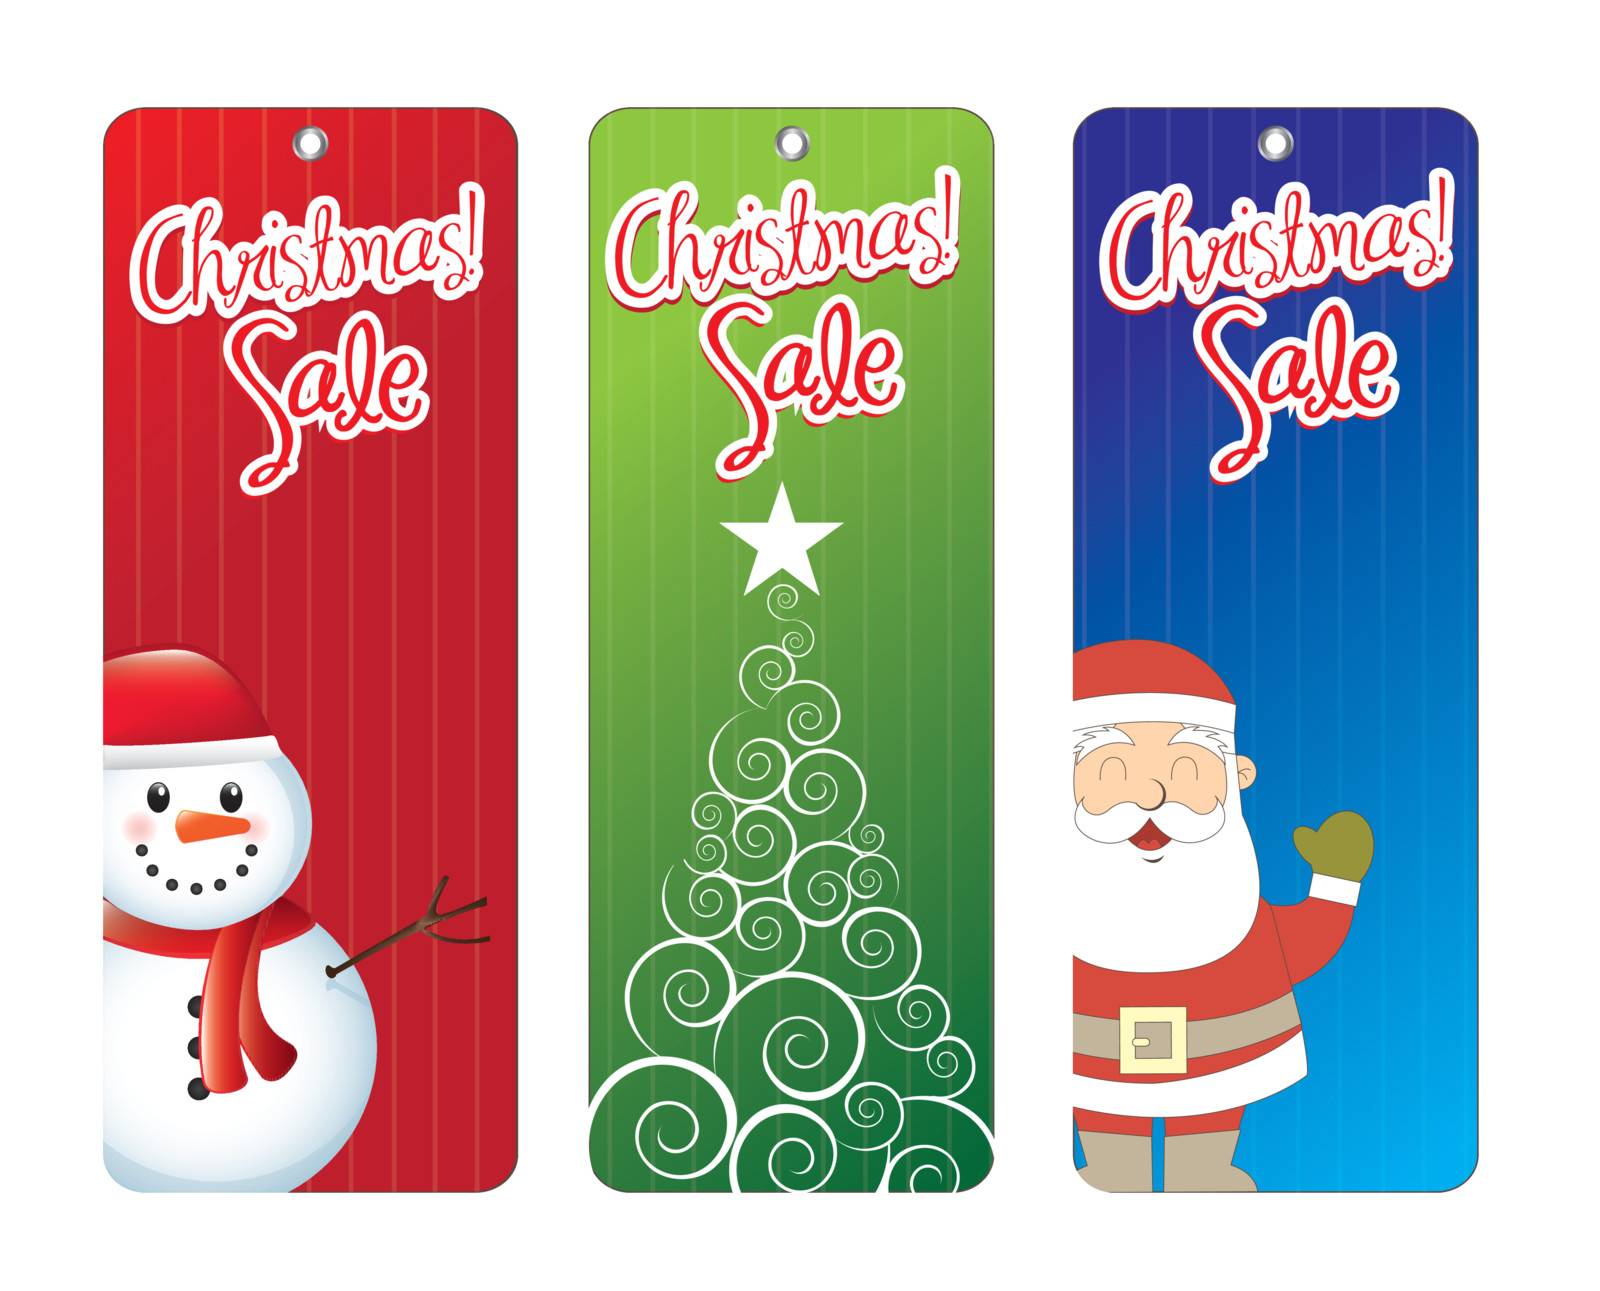 Christmas labels with tree, Santa Claus and snowmen